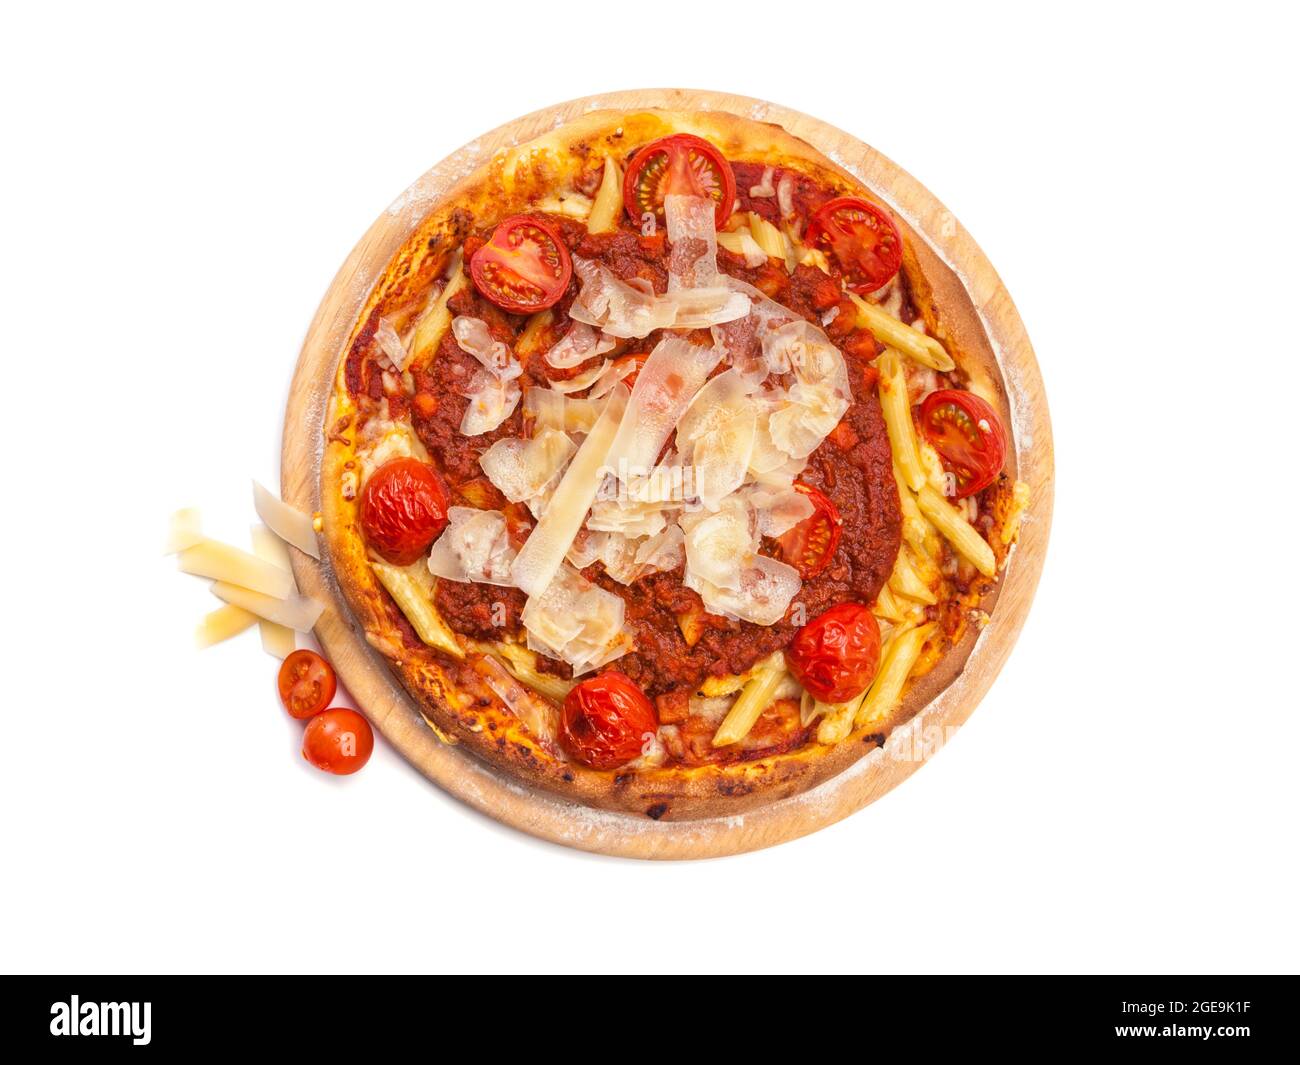 Pizza with penne rigate pasta, cherry tomatoes, tomato sauce  and grated parmesan cheese on wooden platter isolated on white background, high angle vi Stock Photo